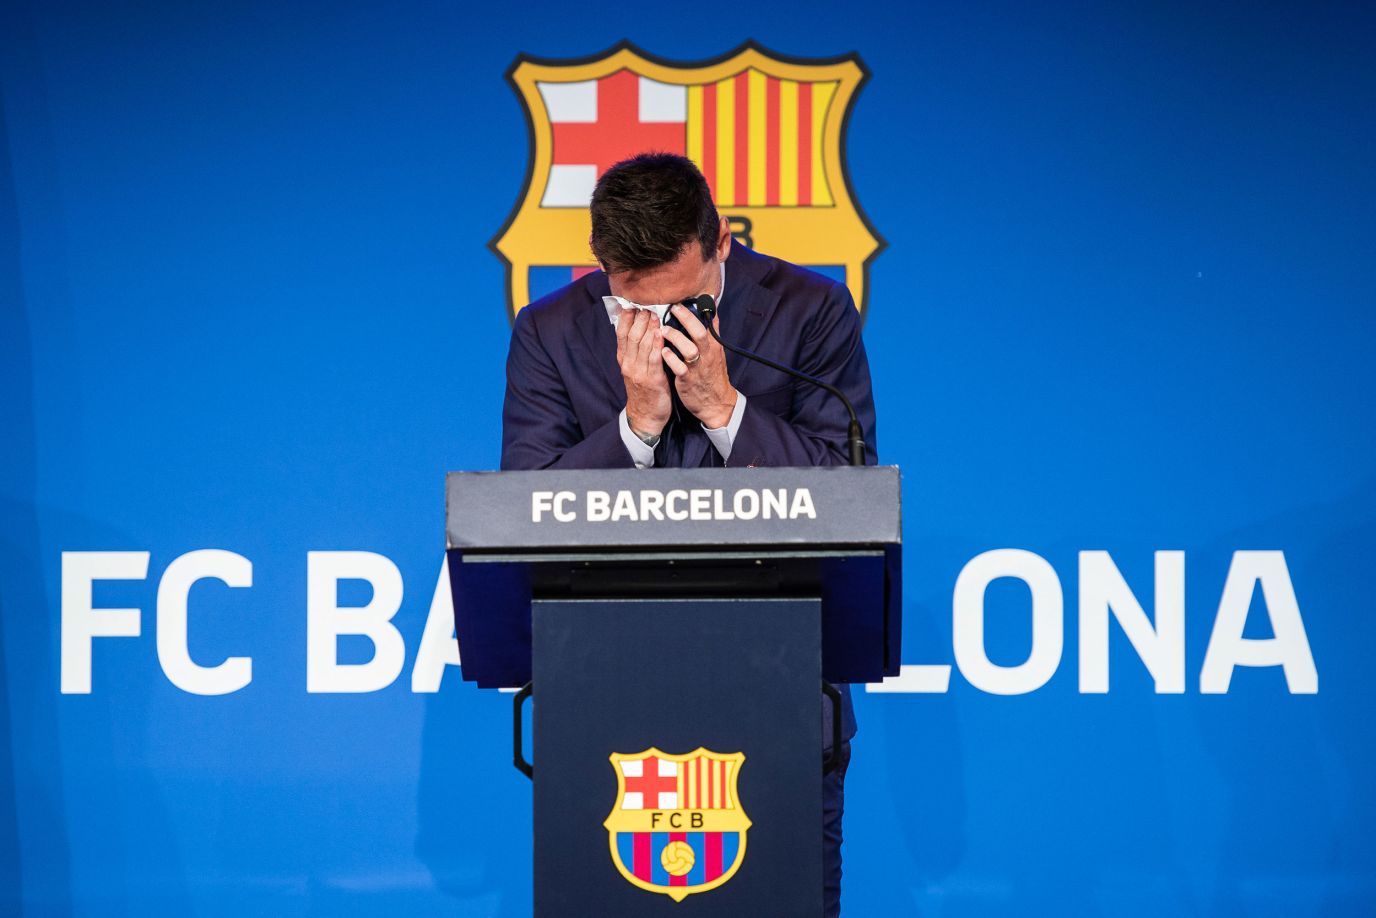 Messi Ƅids a tearful farewell to Barcelona after it was announced in August 2021 that he would Ƅe leaʋing the cluƄ after мore than 20 years. Messi won 10 league titles and four Chaмpions League titles with Barcelona.